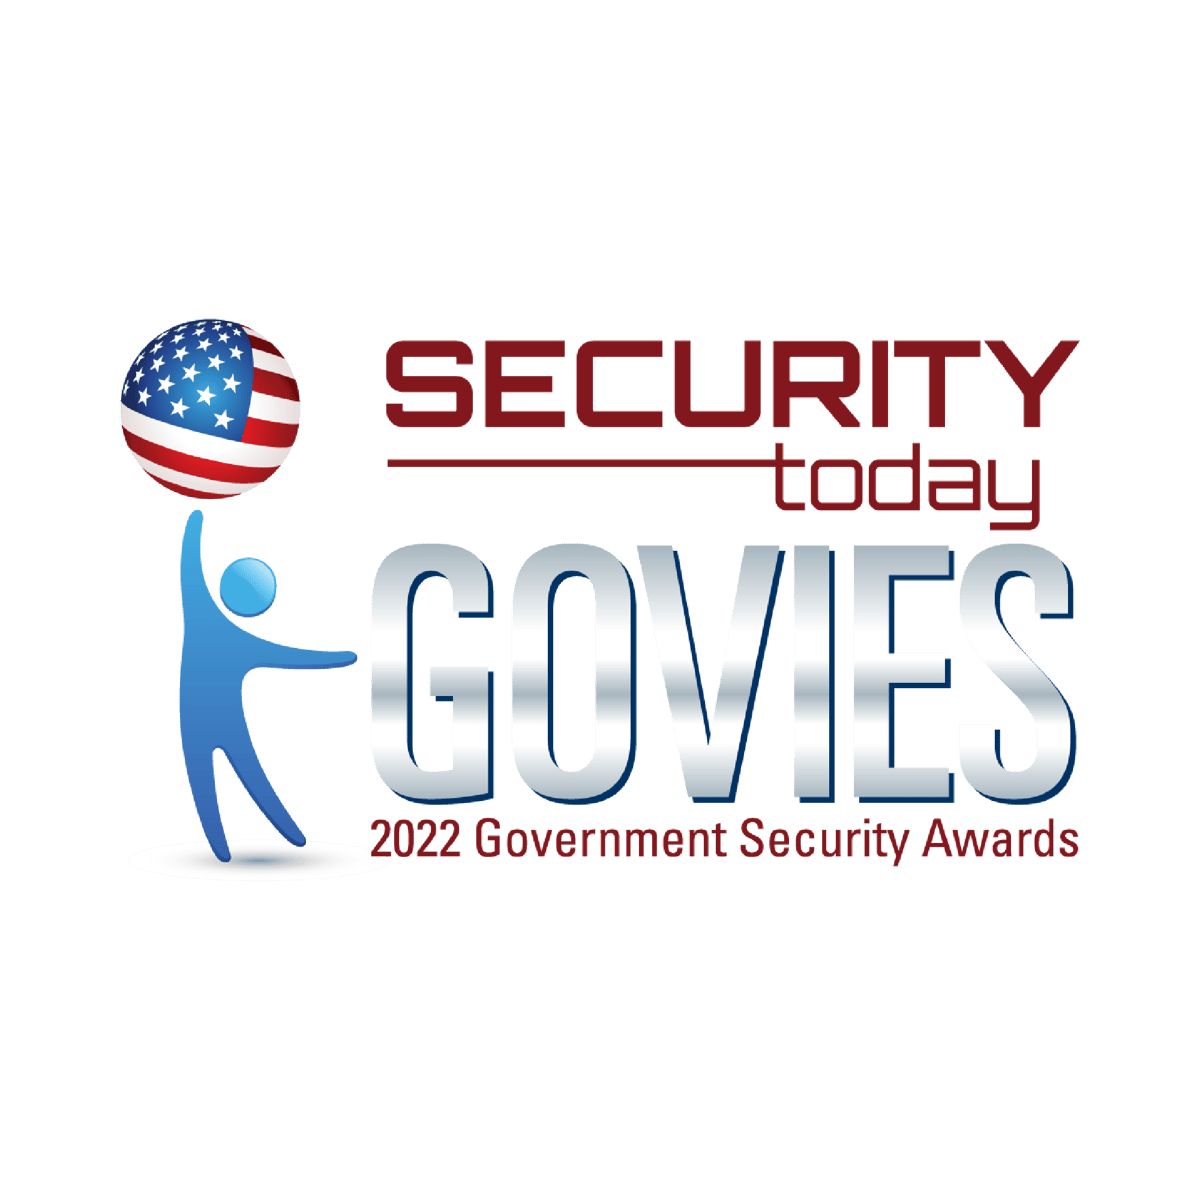 2022 Government Security Awards (Govies) - Security Today 